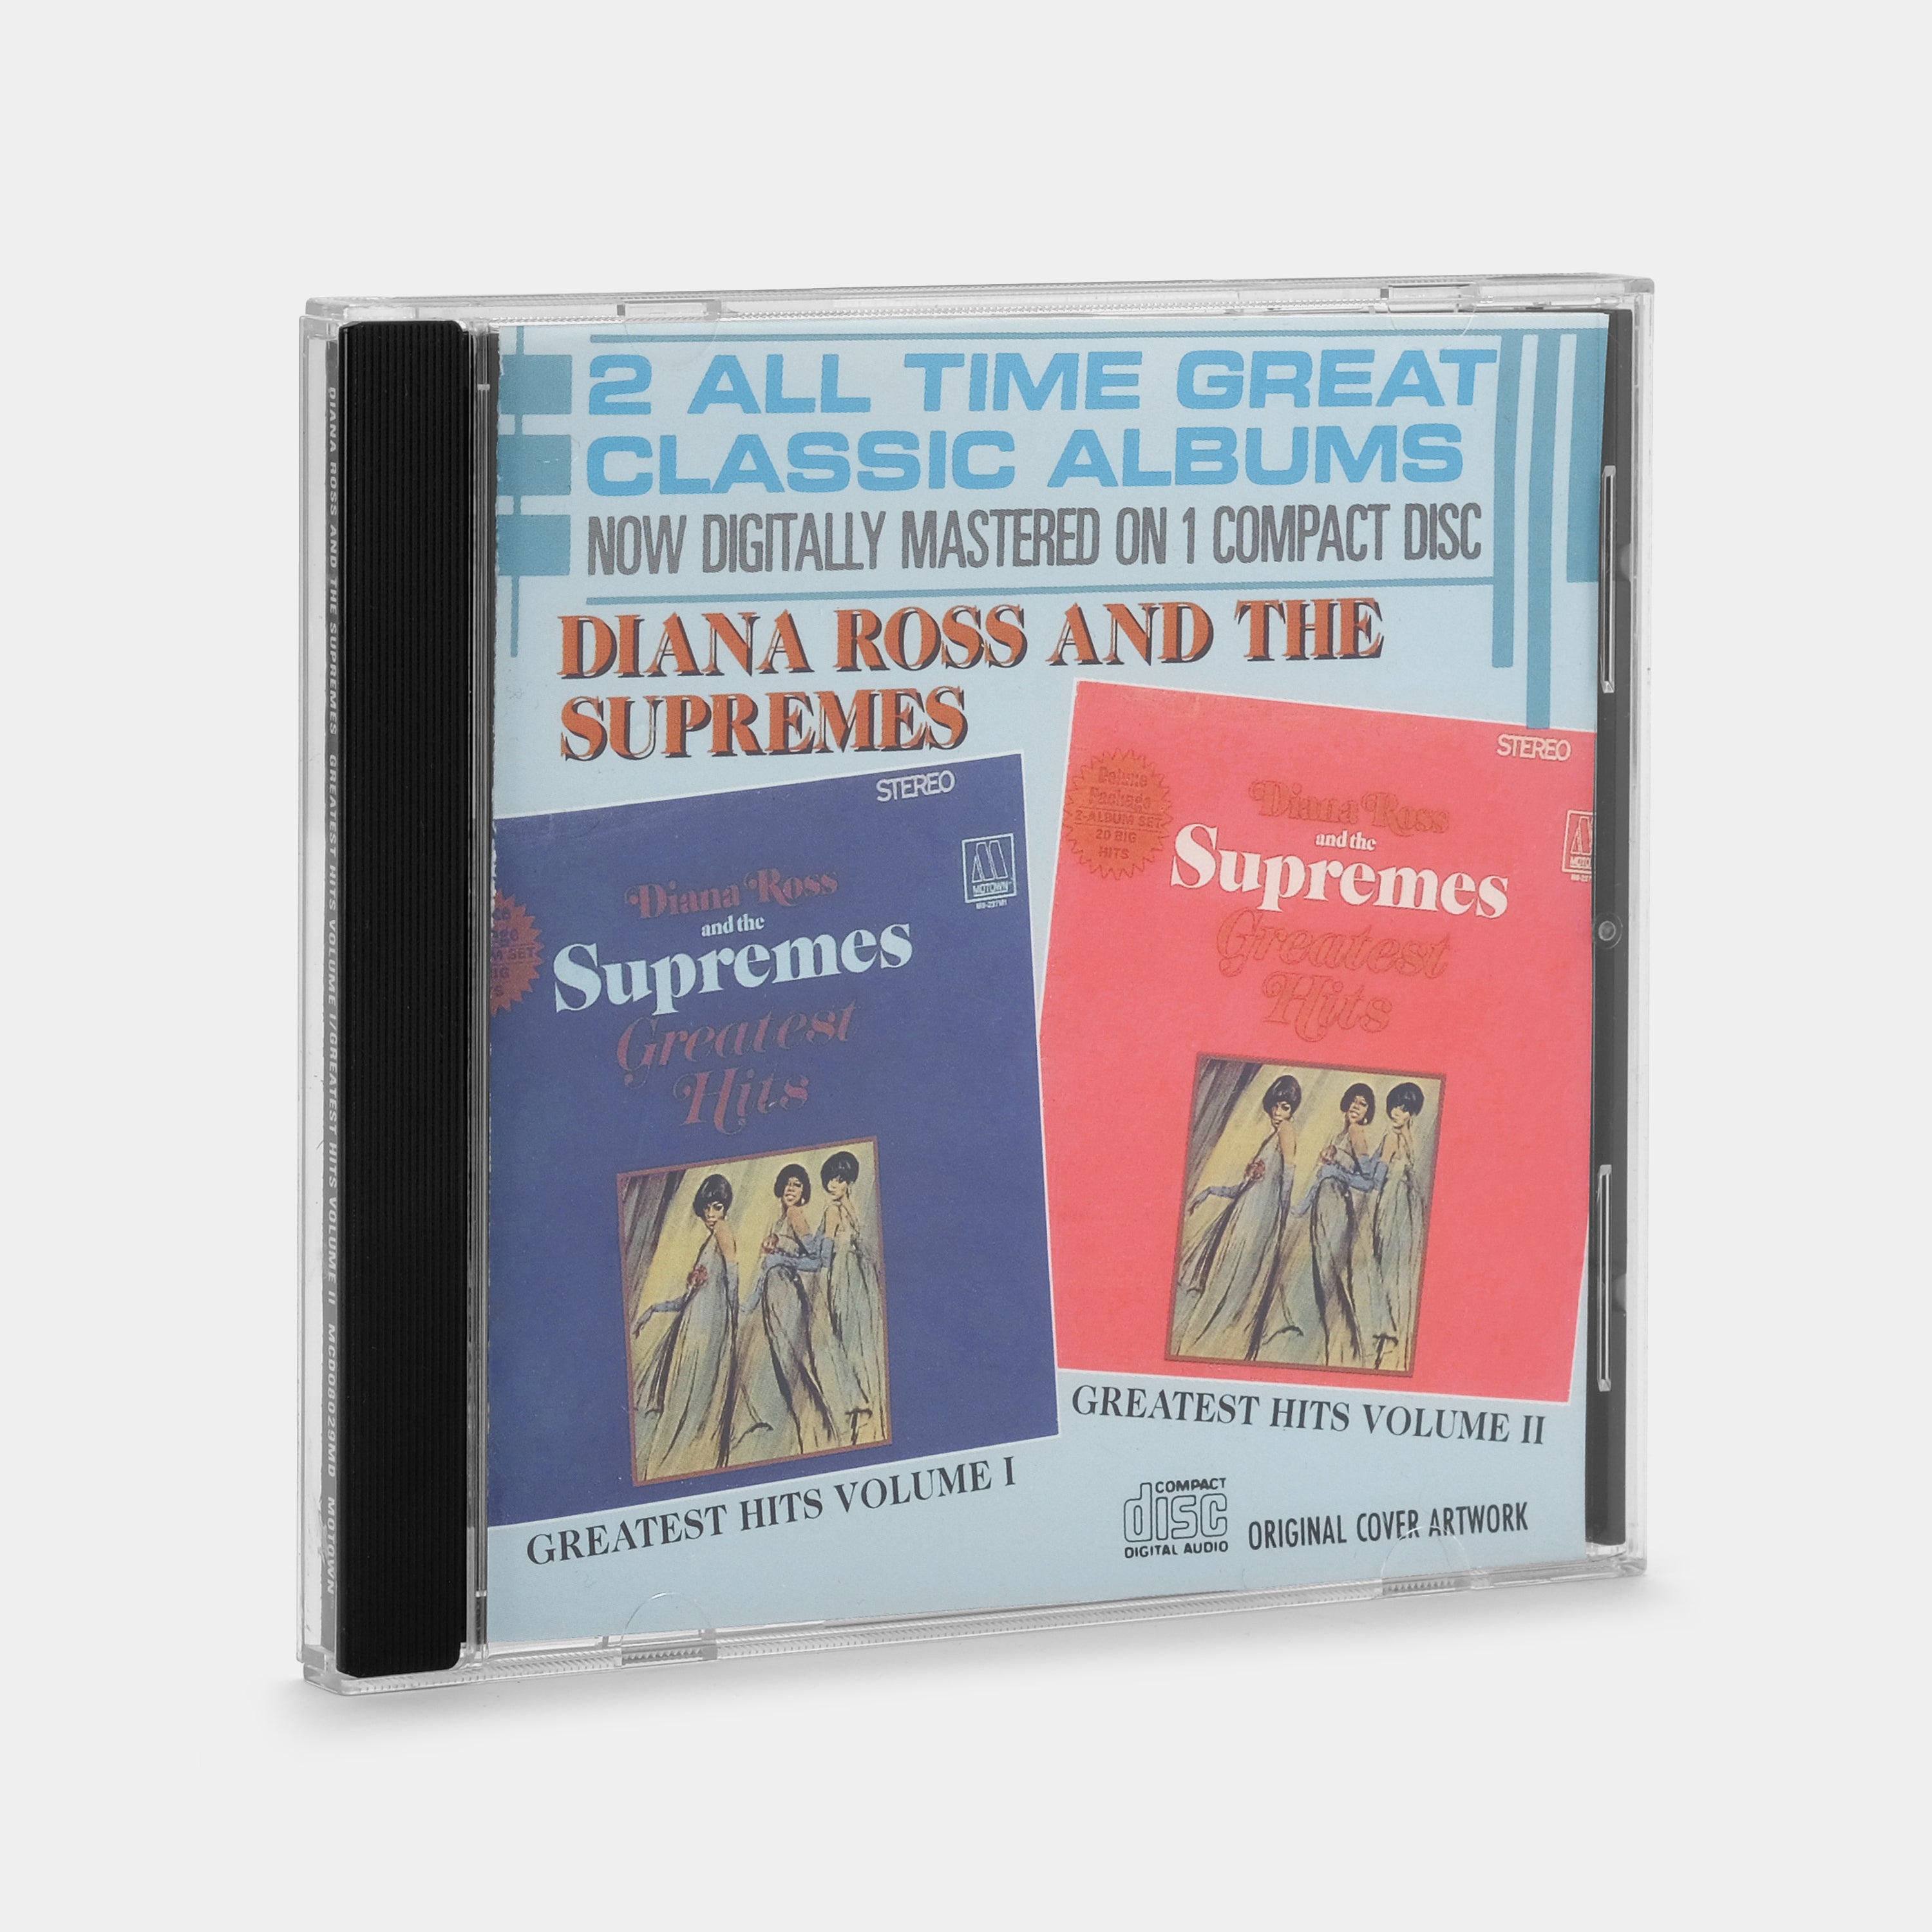 Diana Ross And The Supremes - Greatest Hits Volume I / Greatest Hits Volume II CD